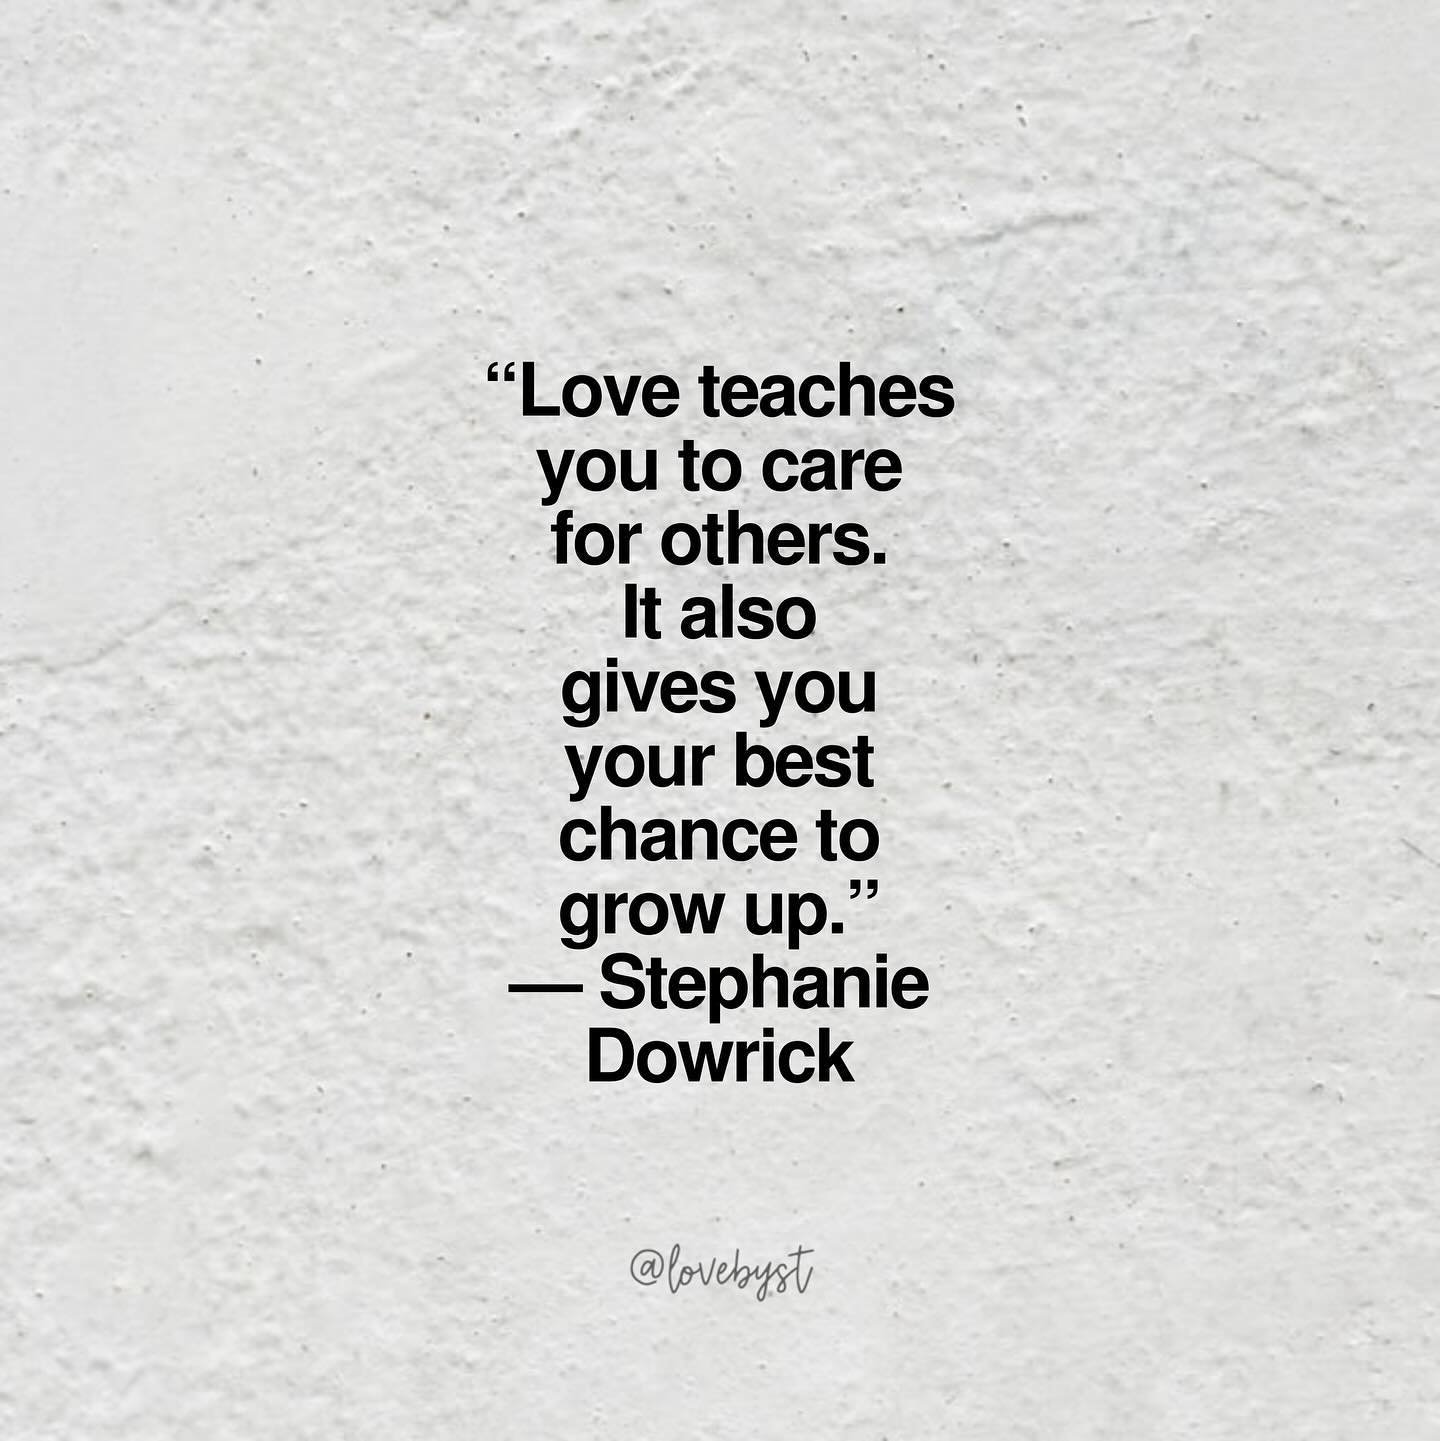 Love: a tremendous opportunity to grow (up). 🤍 Have quite taken to Dowrick&rsquo;s work and theories on love after reading her &lsquo;Forgiveness and Other Acts of Love&rsquo;. Very much recommend. Virtues detailed @ justchooselove.com/defining-love